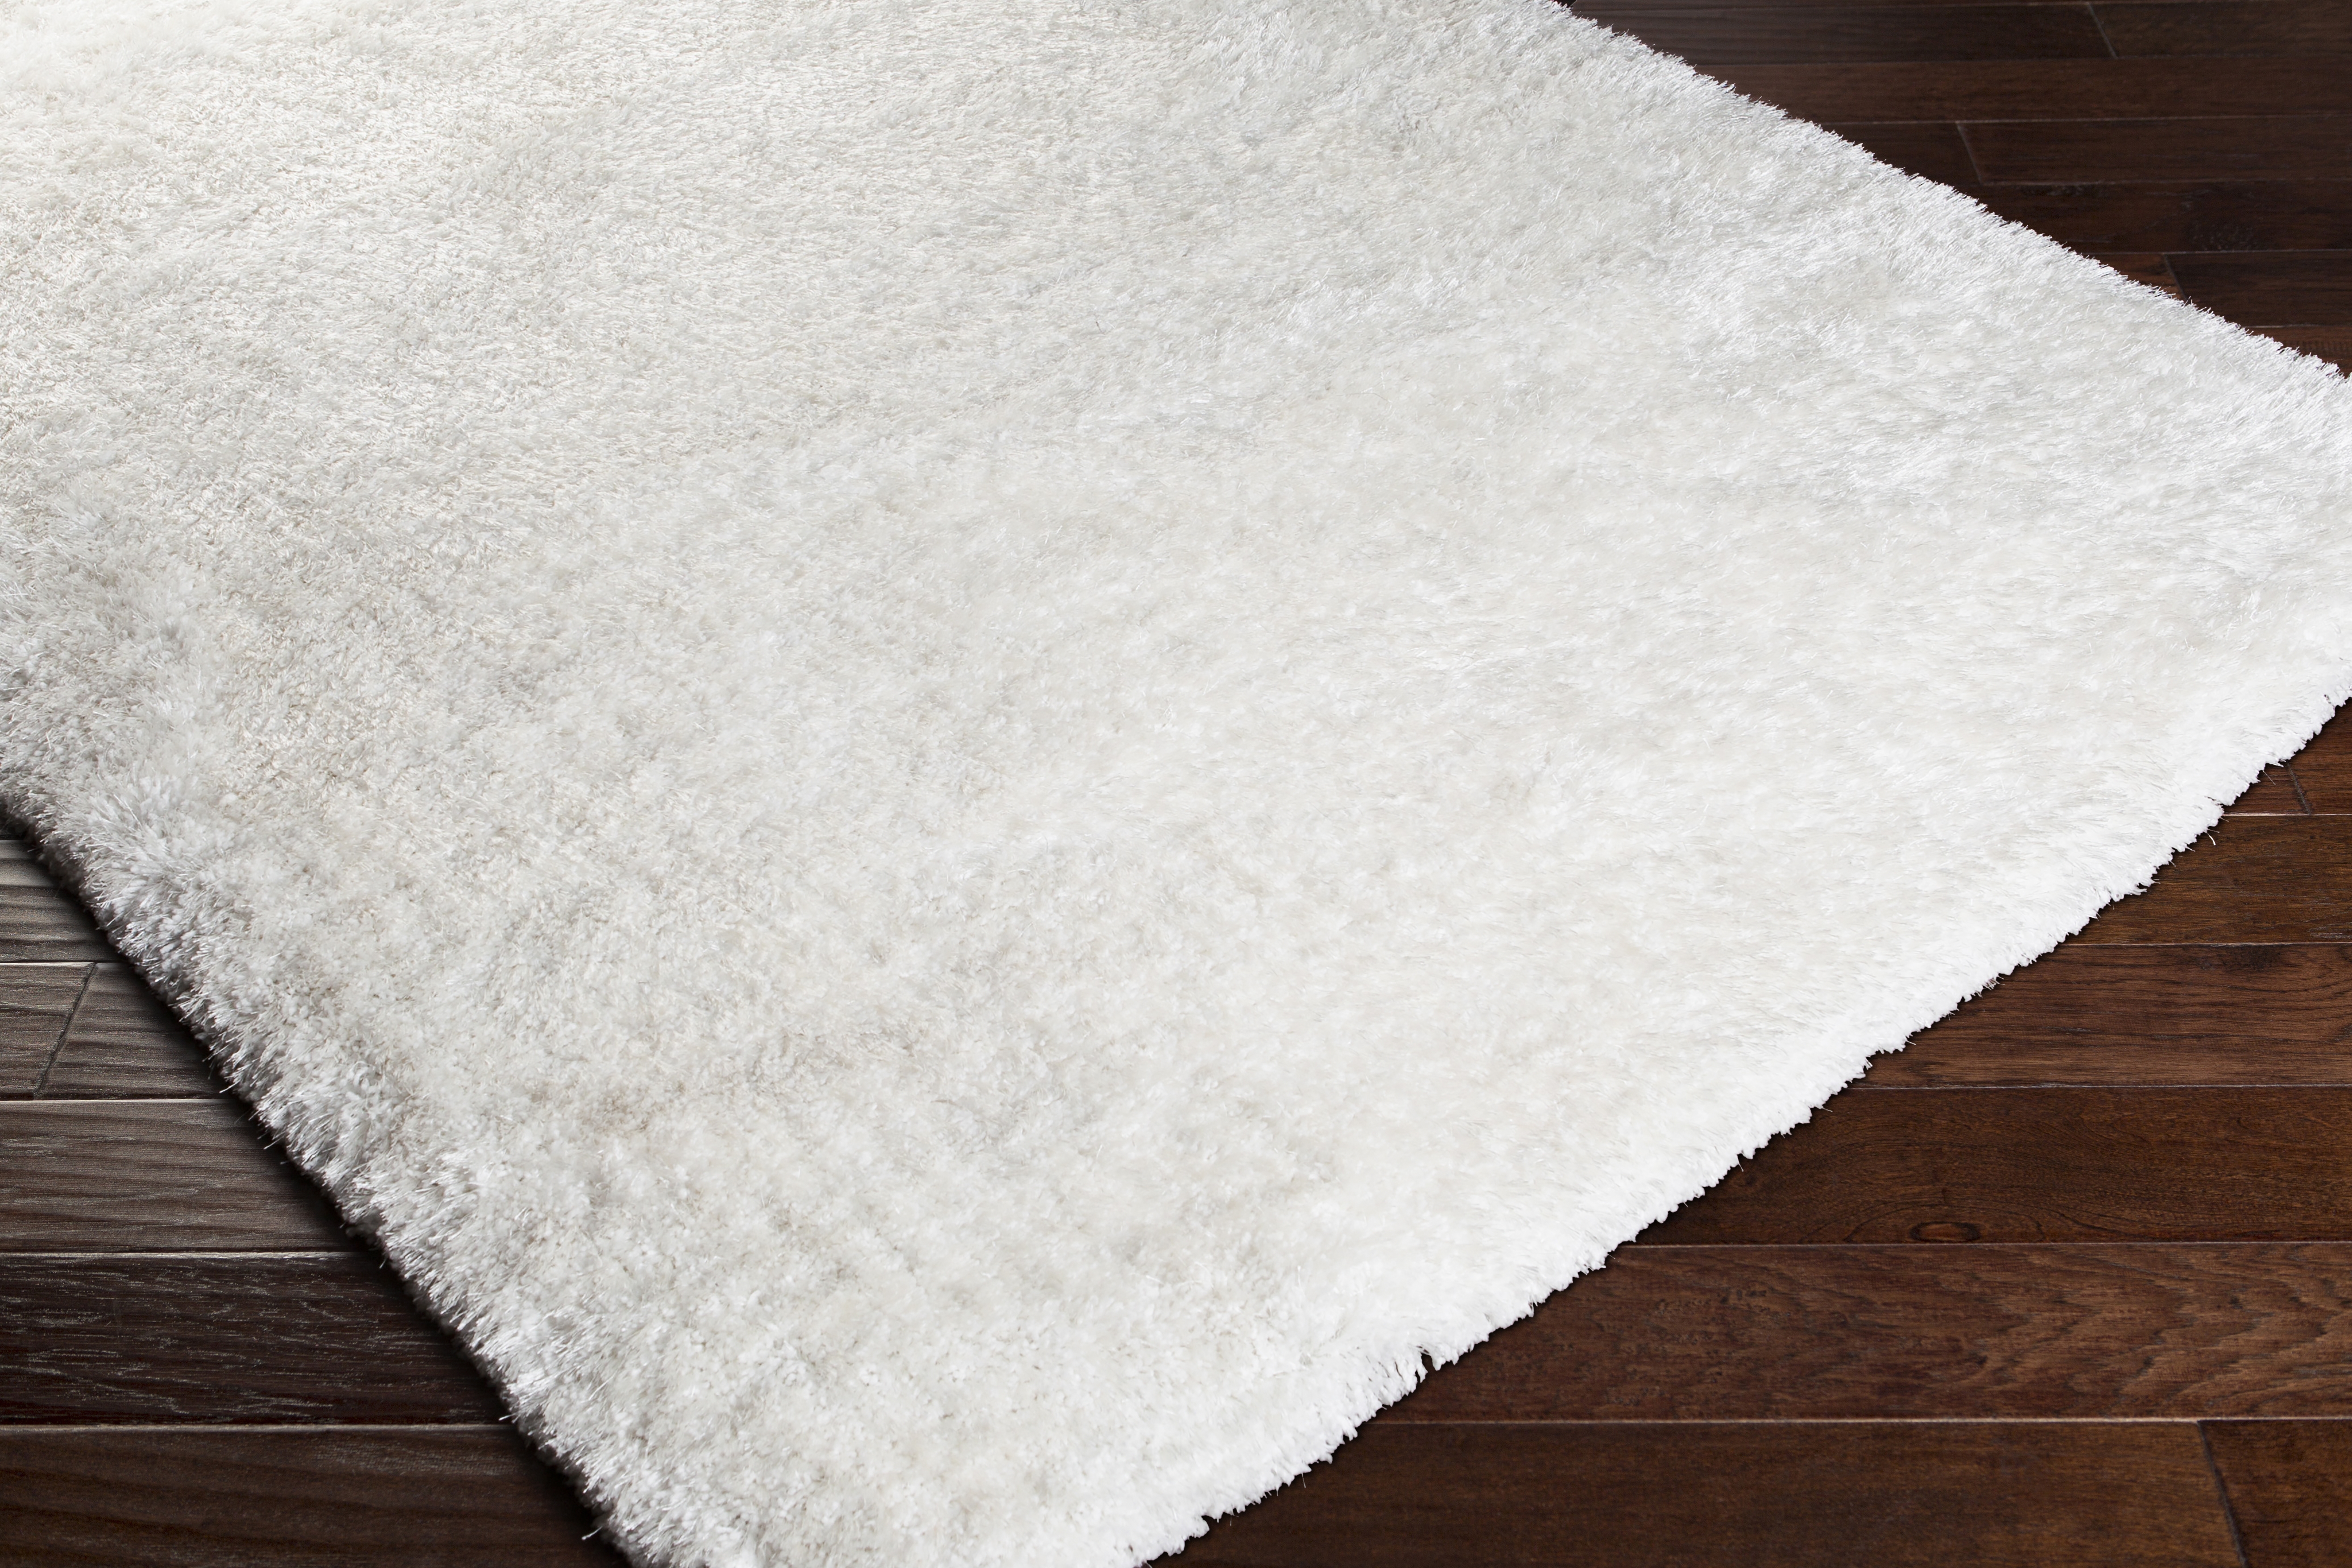 Grizzly Rug, 2' x 3' - Image 5